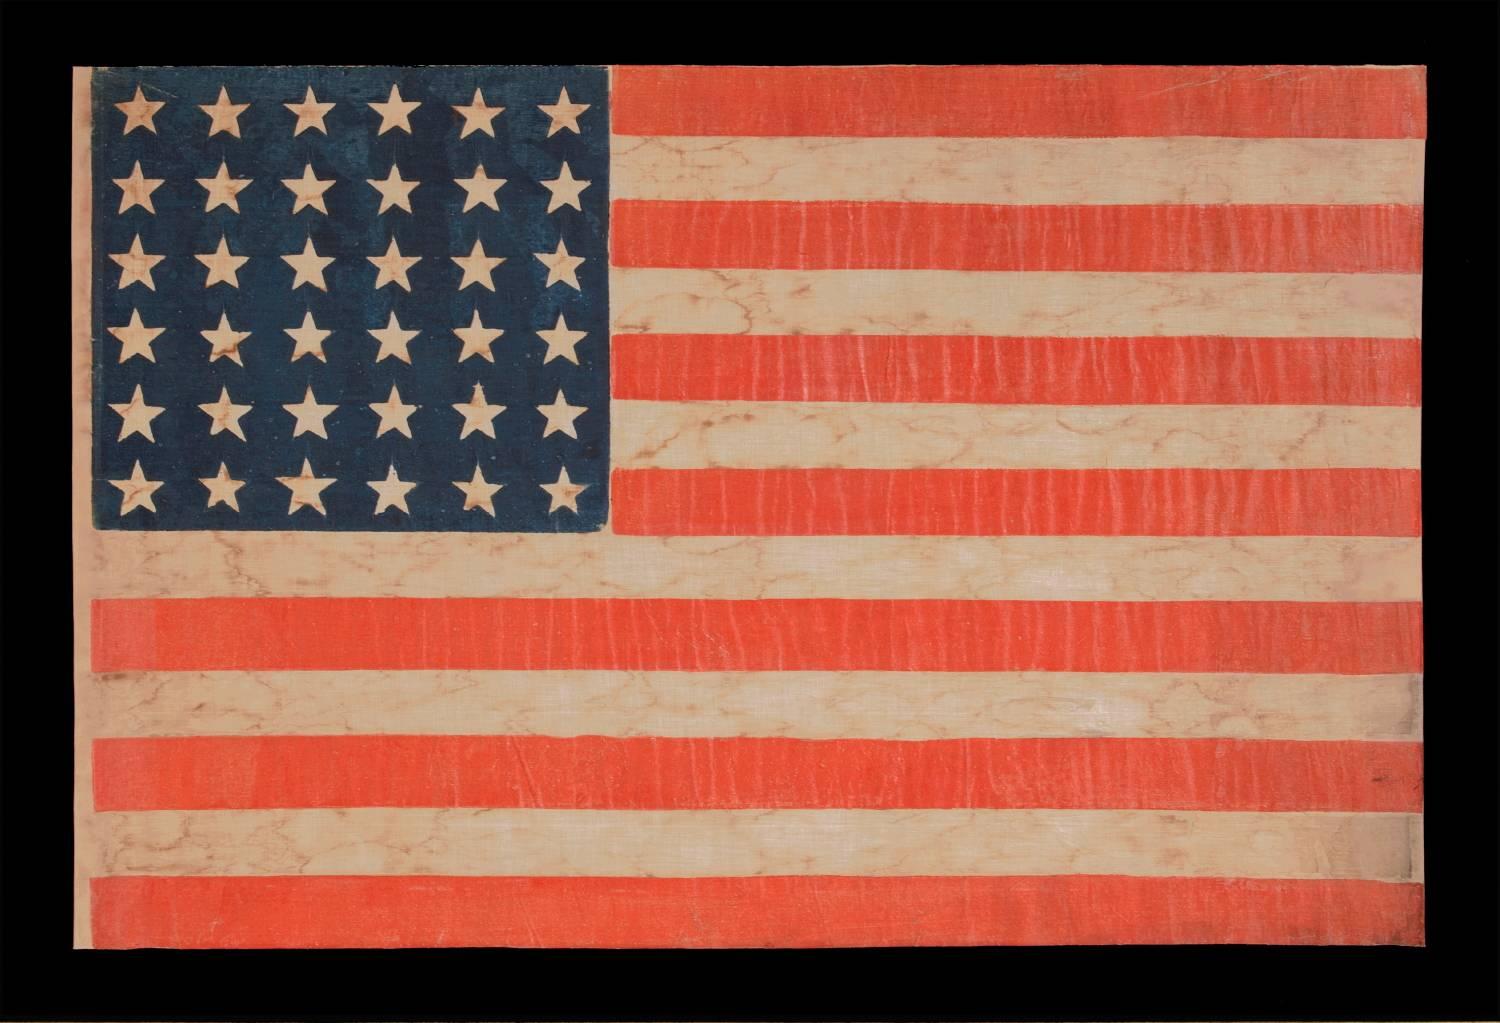 36 STAR ANTIQUE AMERICAN PARADE FLAG OF THE CIVIL WAR ERA, IN AN ESPECIALLY LARGE SCALE AND WITH BOLD COLOR, 1864-67, NEVADA STATEHOOD: 

36 star American national flag of the Civil War era, printed on coarse, glazed cotton. The 36th state, Nevada,